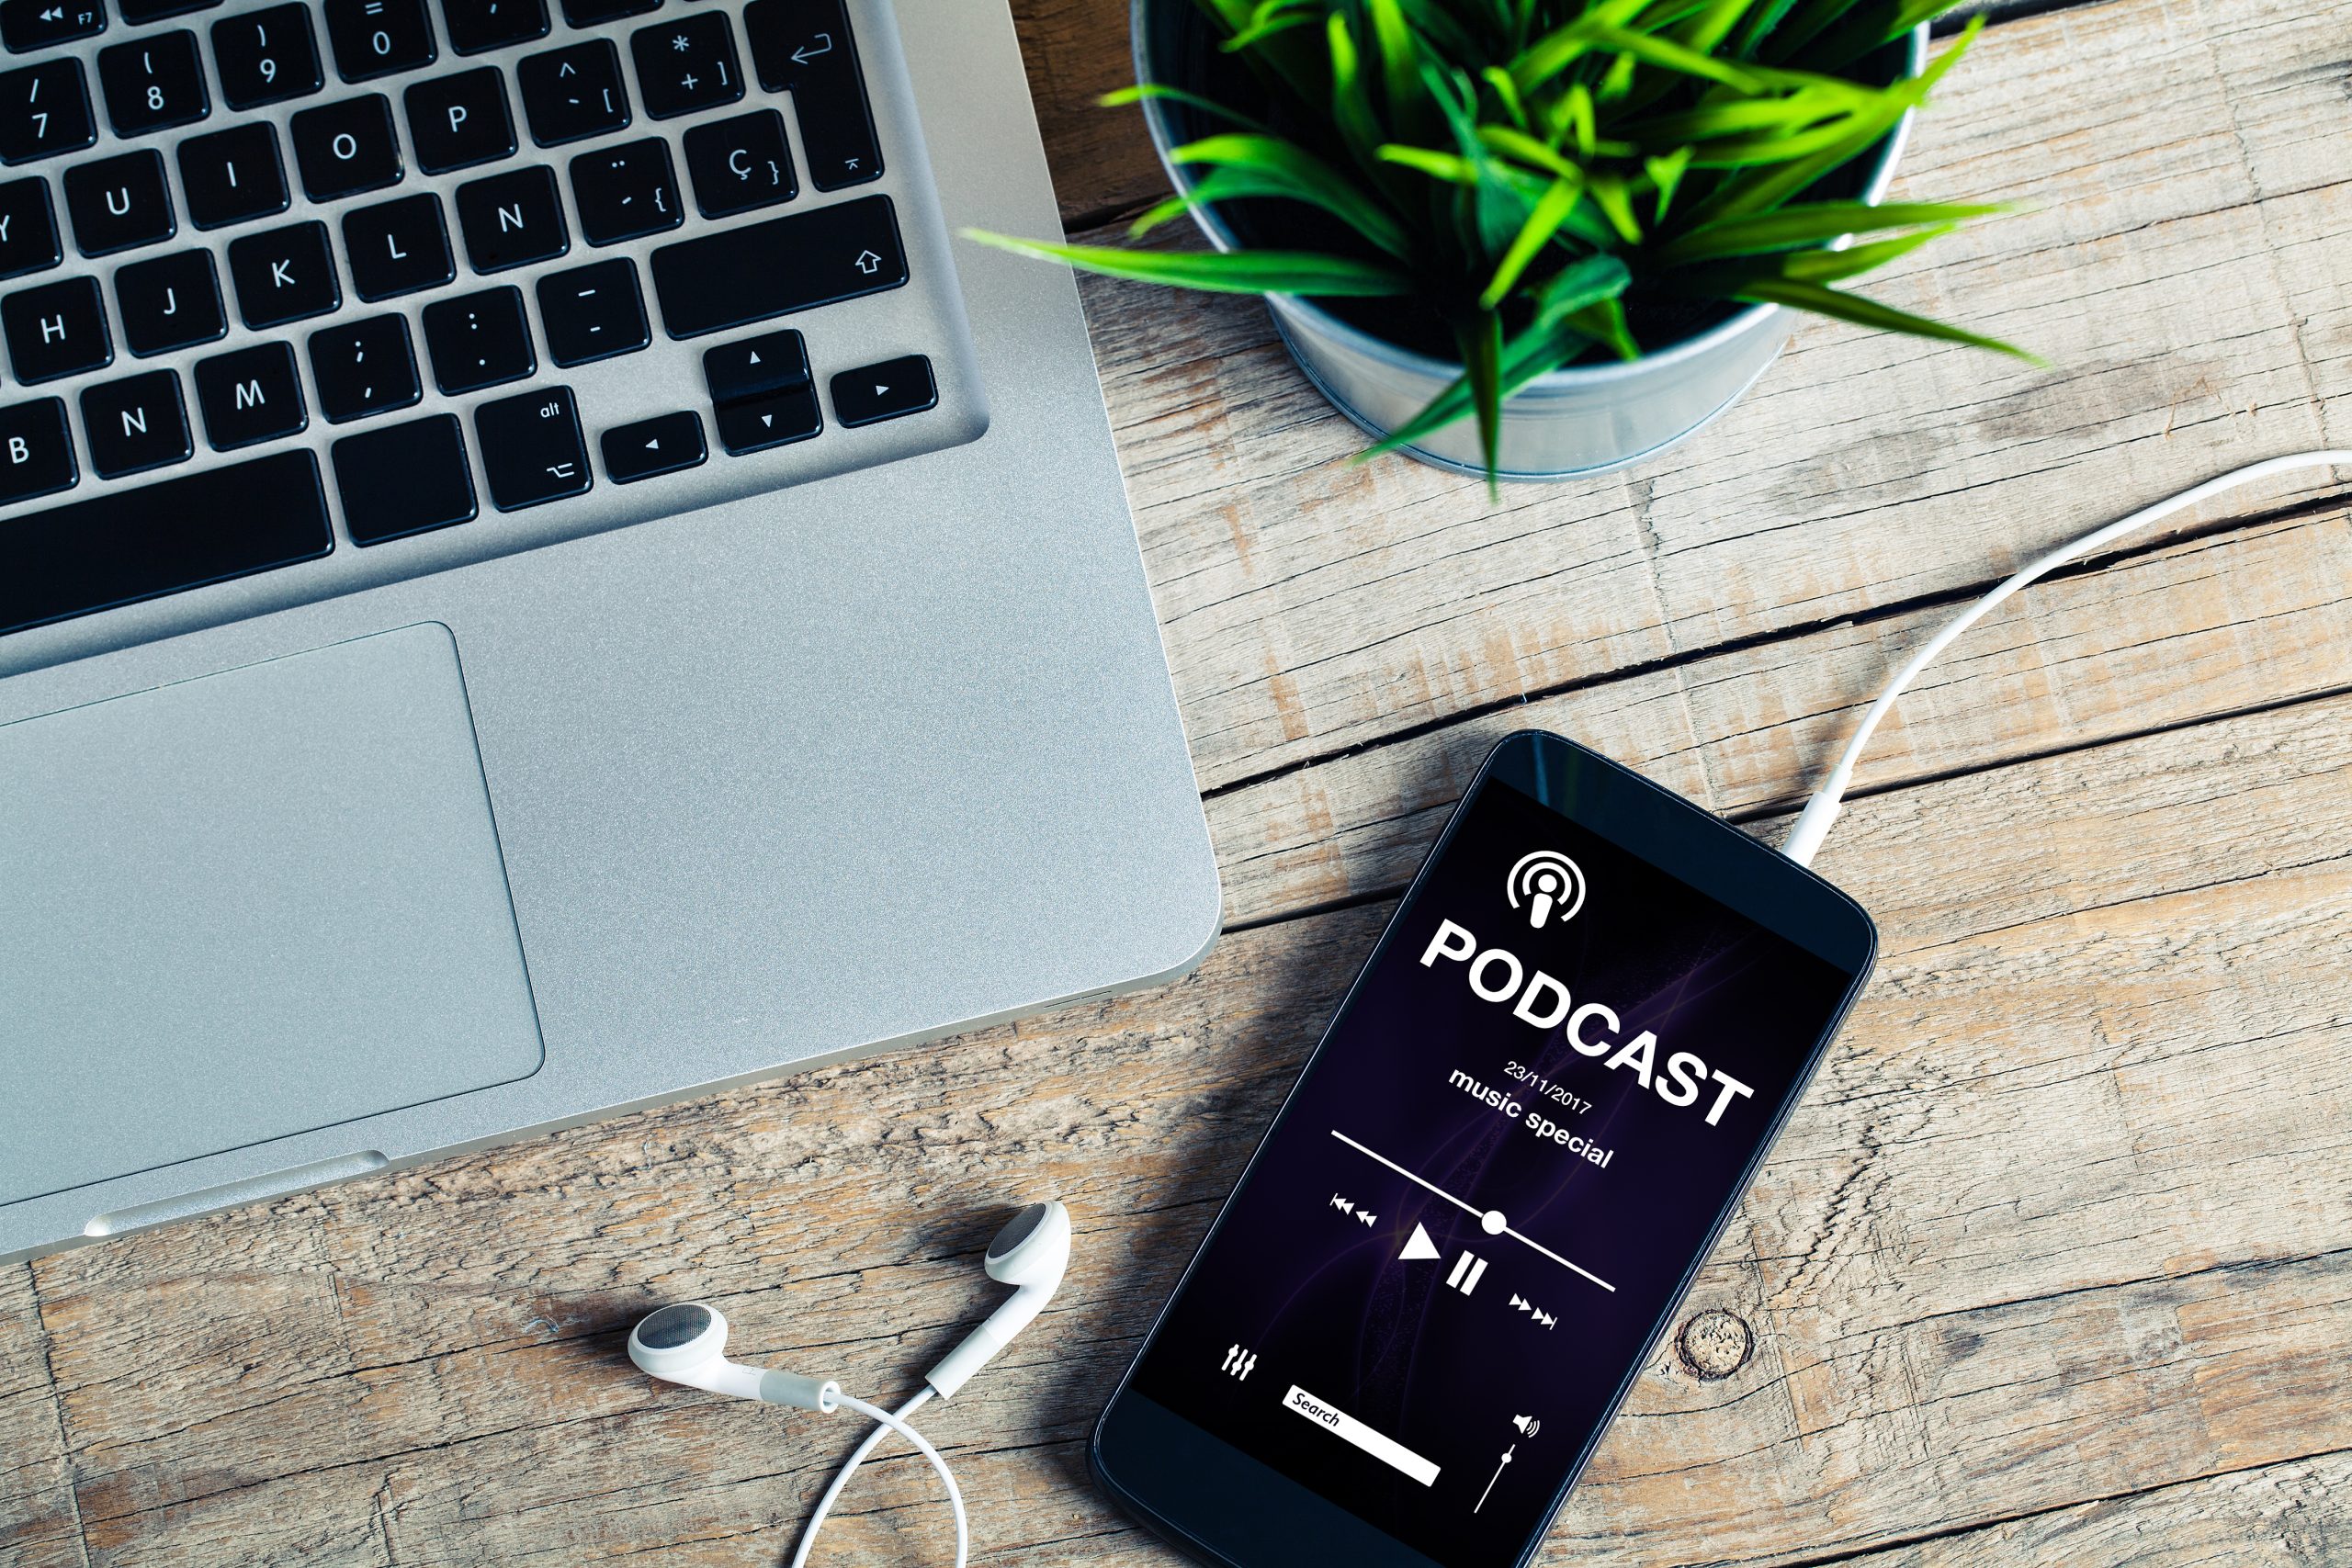 Podcasts on entertainment for seniors